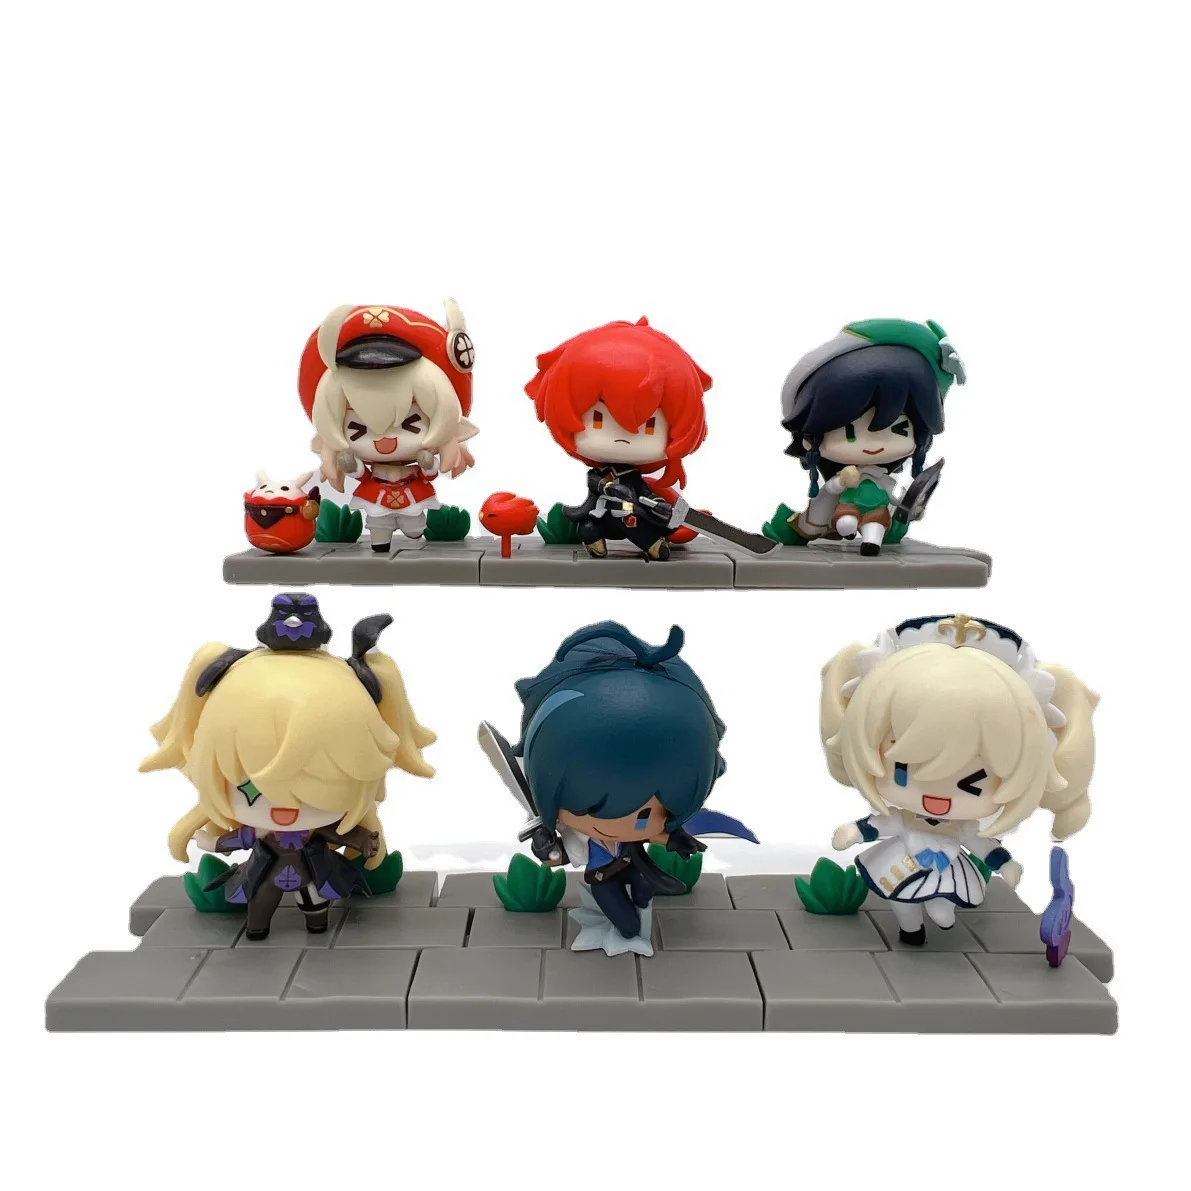 

6PCS Anime Genshin Impact Klee Diluc Venti Fischi Kaeya Battlefield Heroes Theme Series Action Figure Collectible Doll Model